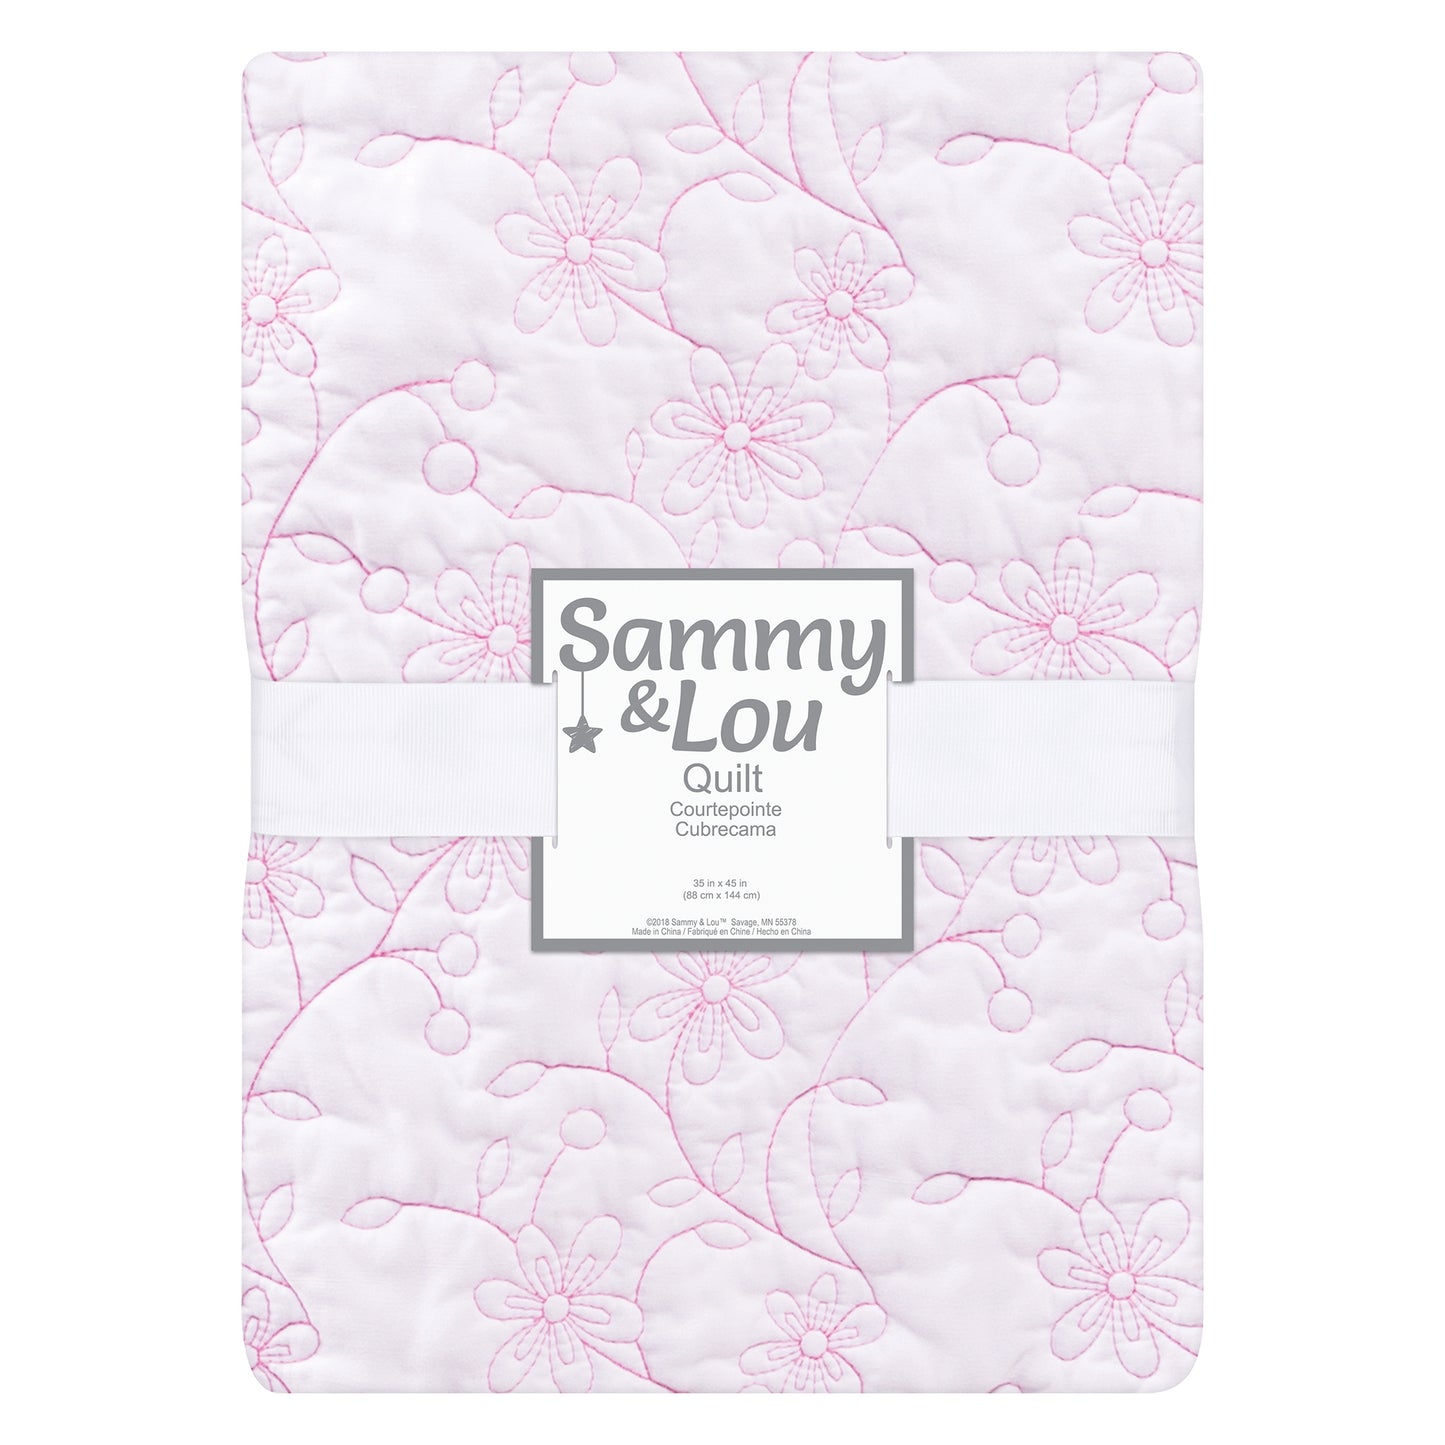 Sammy and Lou Floral Quilt in packaging